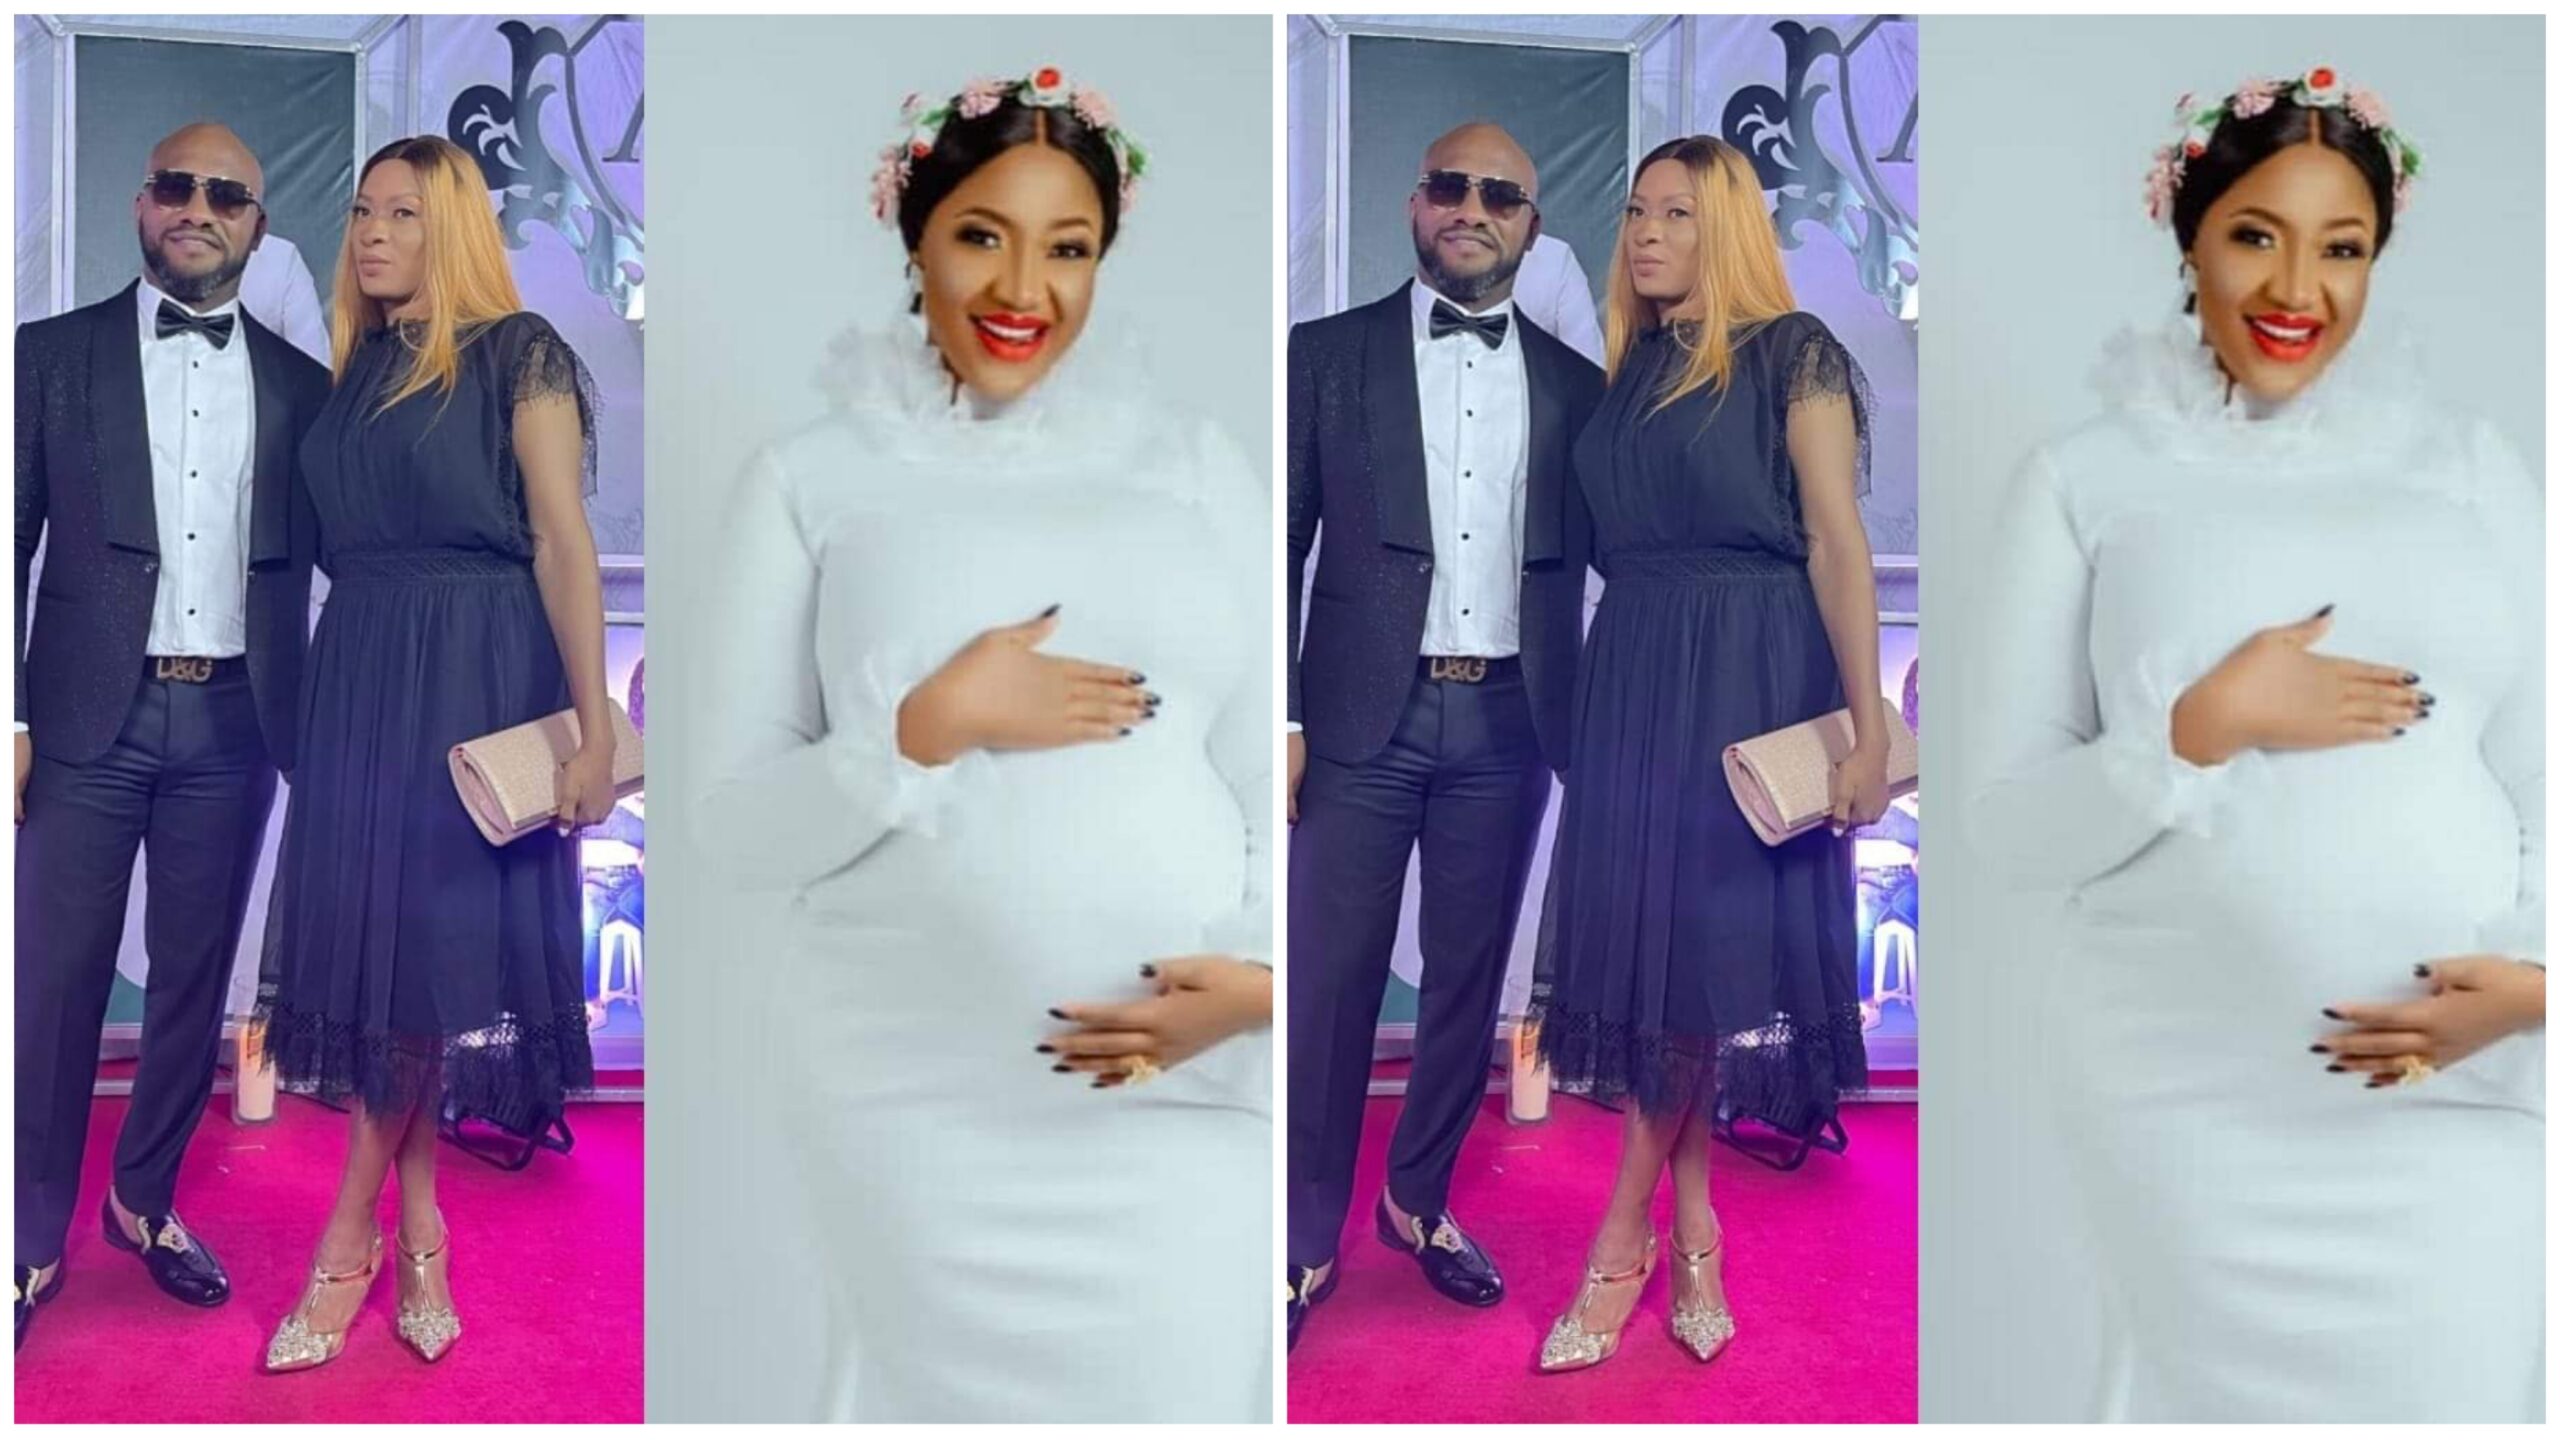 He was always taking care of his side chic and her kids at the expense of his wife” Yul Edochie’s marriage faces crisis